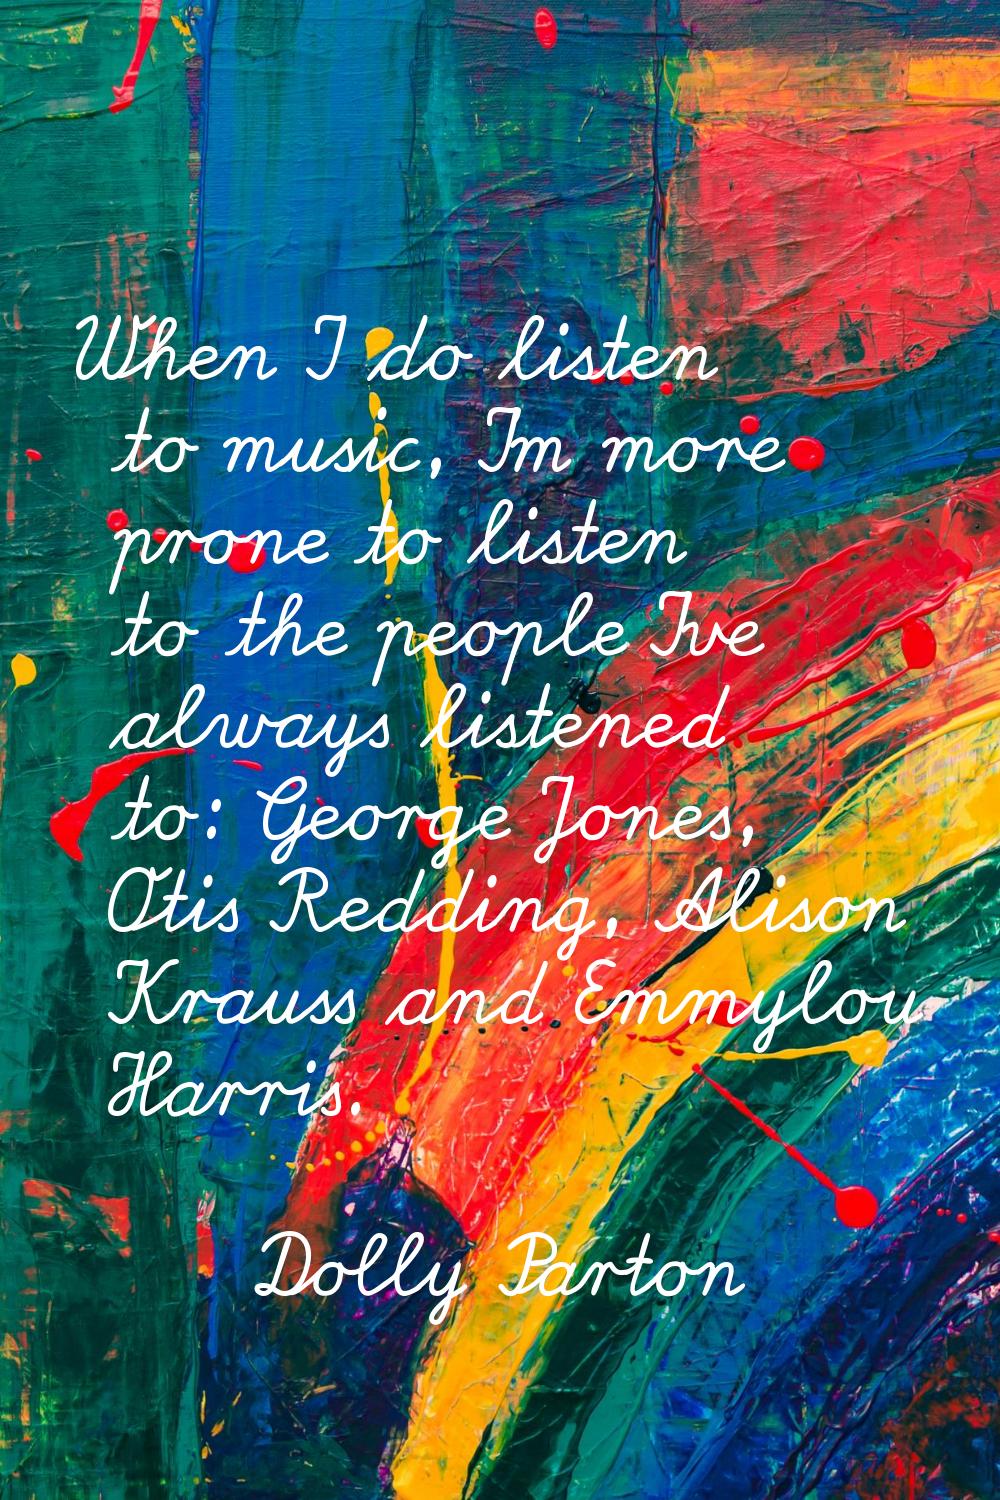 When I do listen to music, I'm more prone to listen to the people I've always listened to: George J